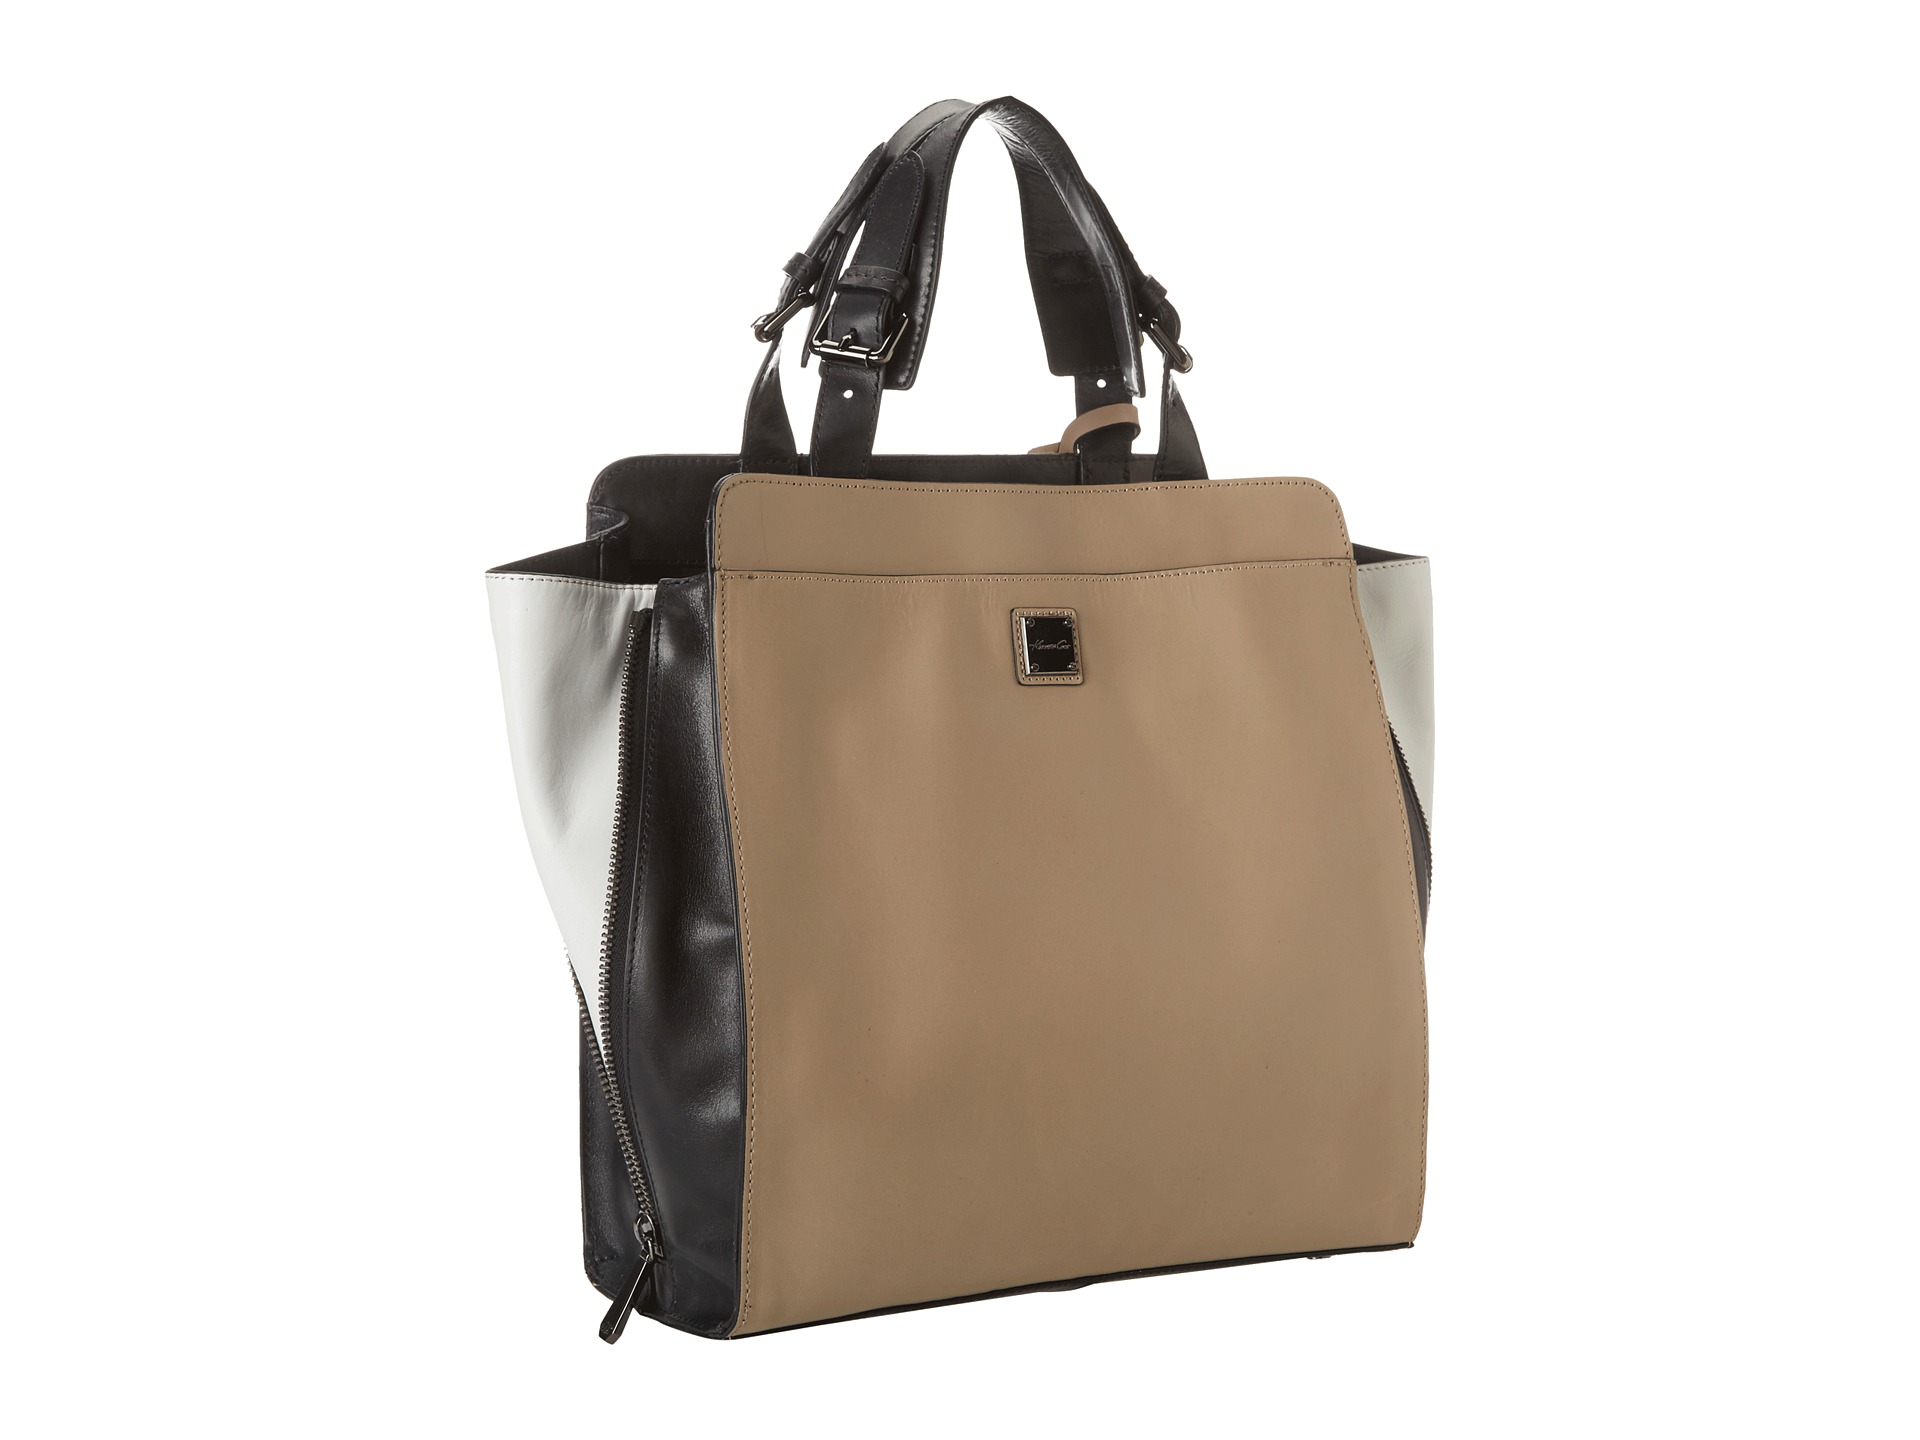 Kenneth Cole Madison Tote Black | Shipped Free at Zappos